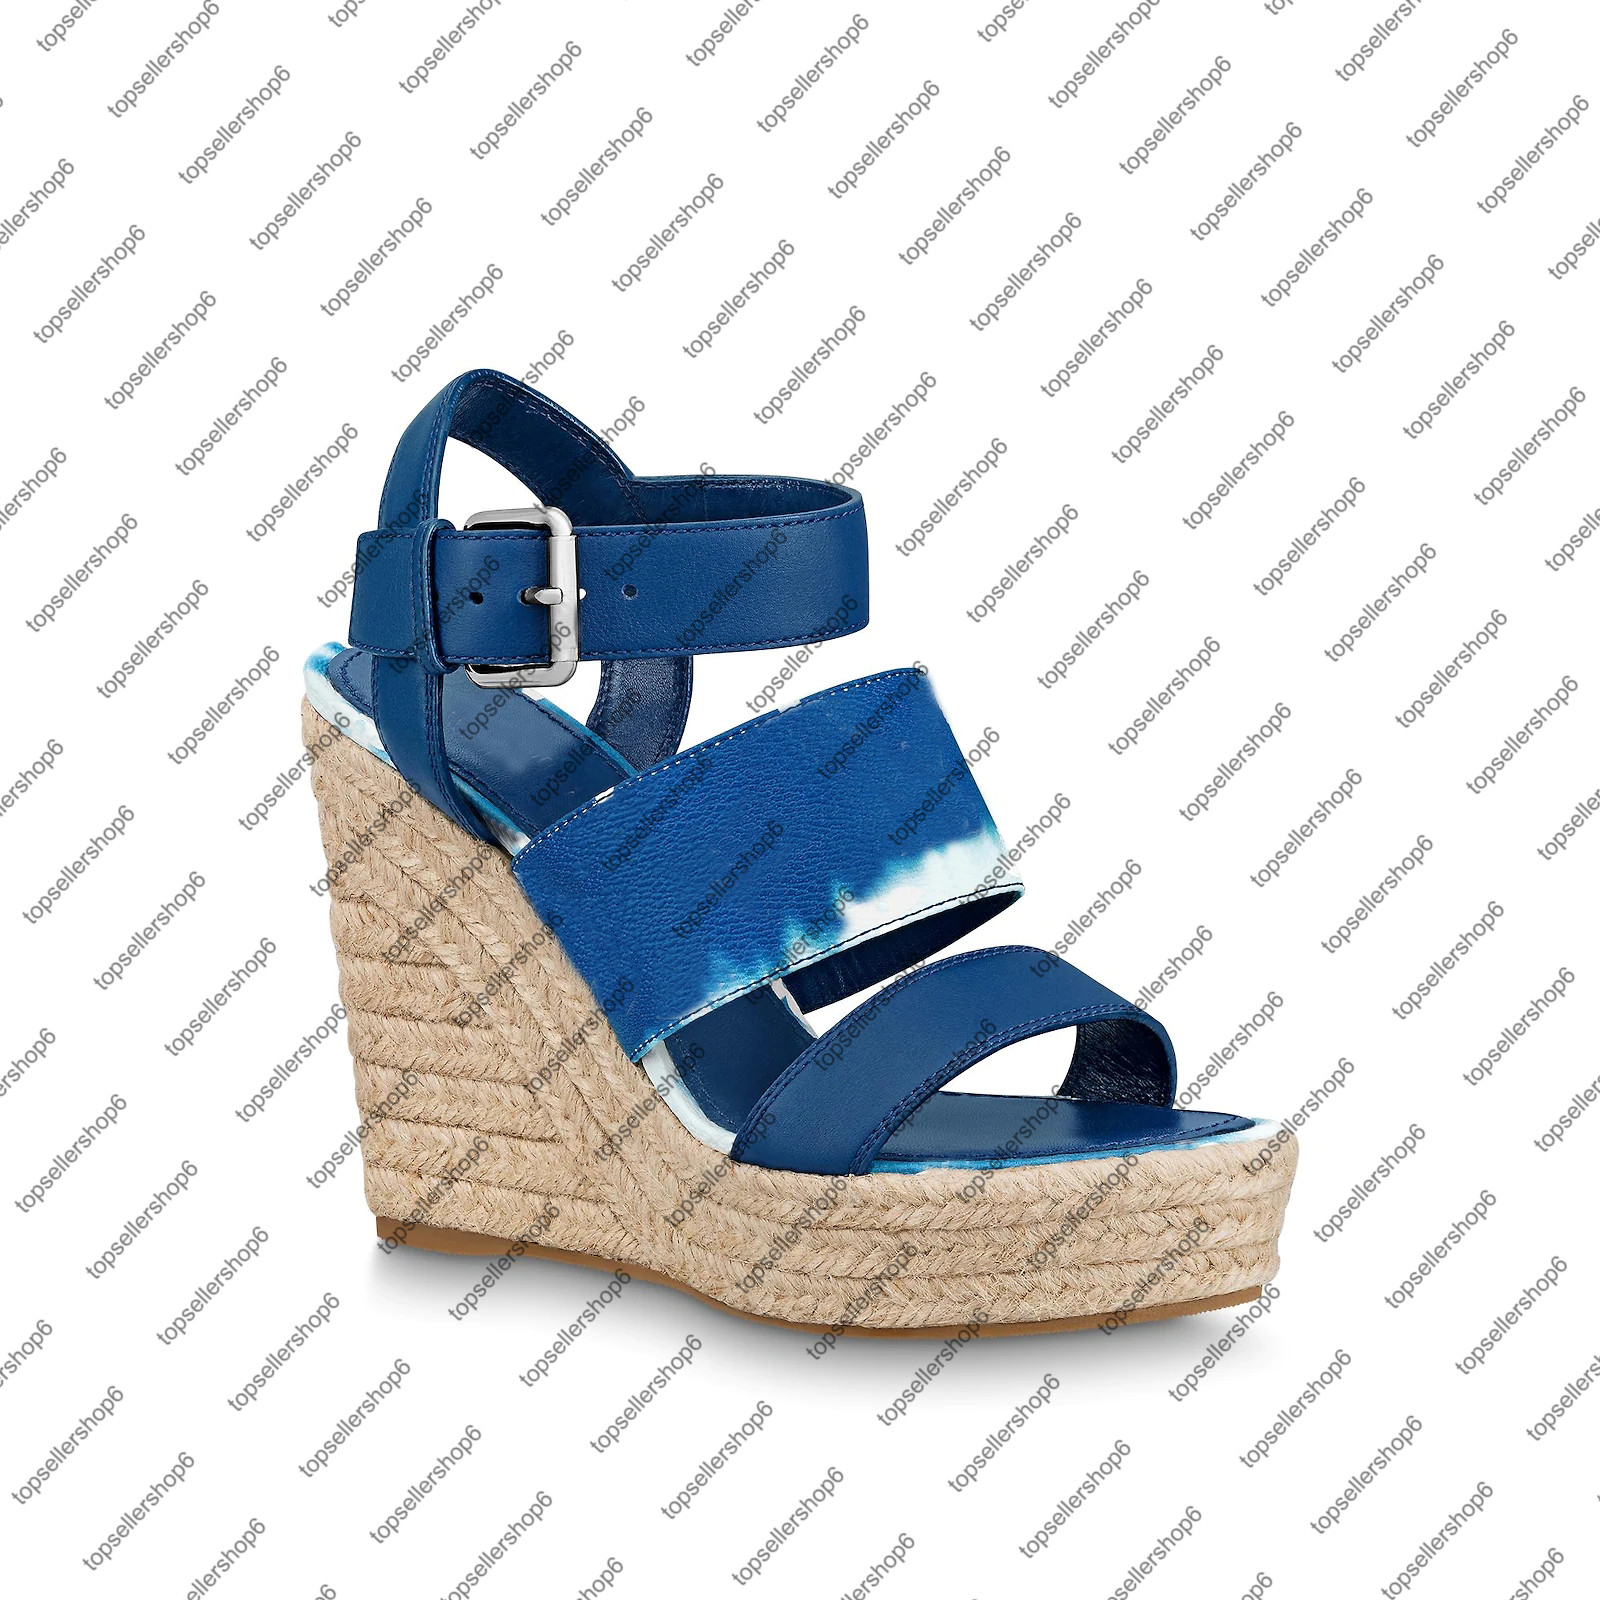 

ESCALE STARBOARD WEDGE Women Platform sandal canvas tie-dye espadrilles Blue 12cm high heel sandal engraved buckle Rubber outsole shoes, Not sell alone gift bag